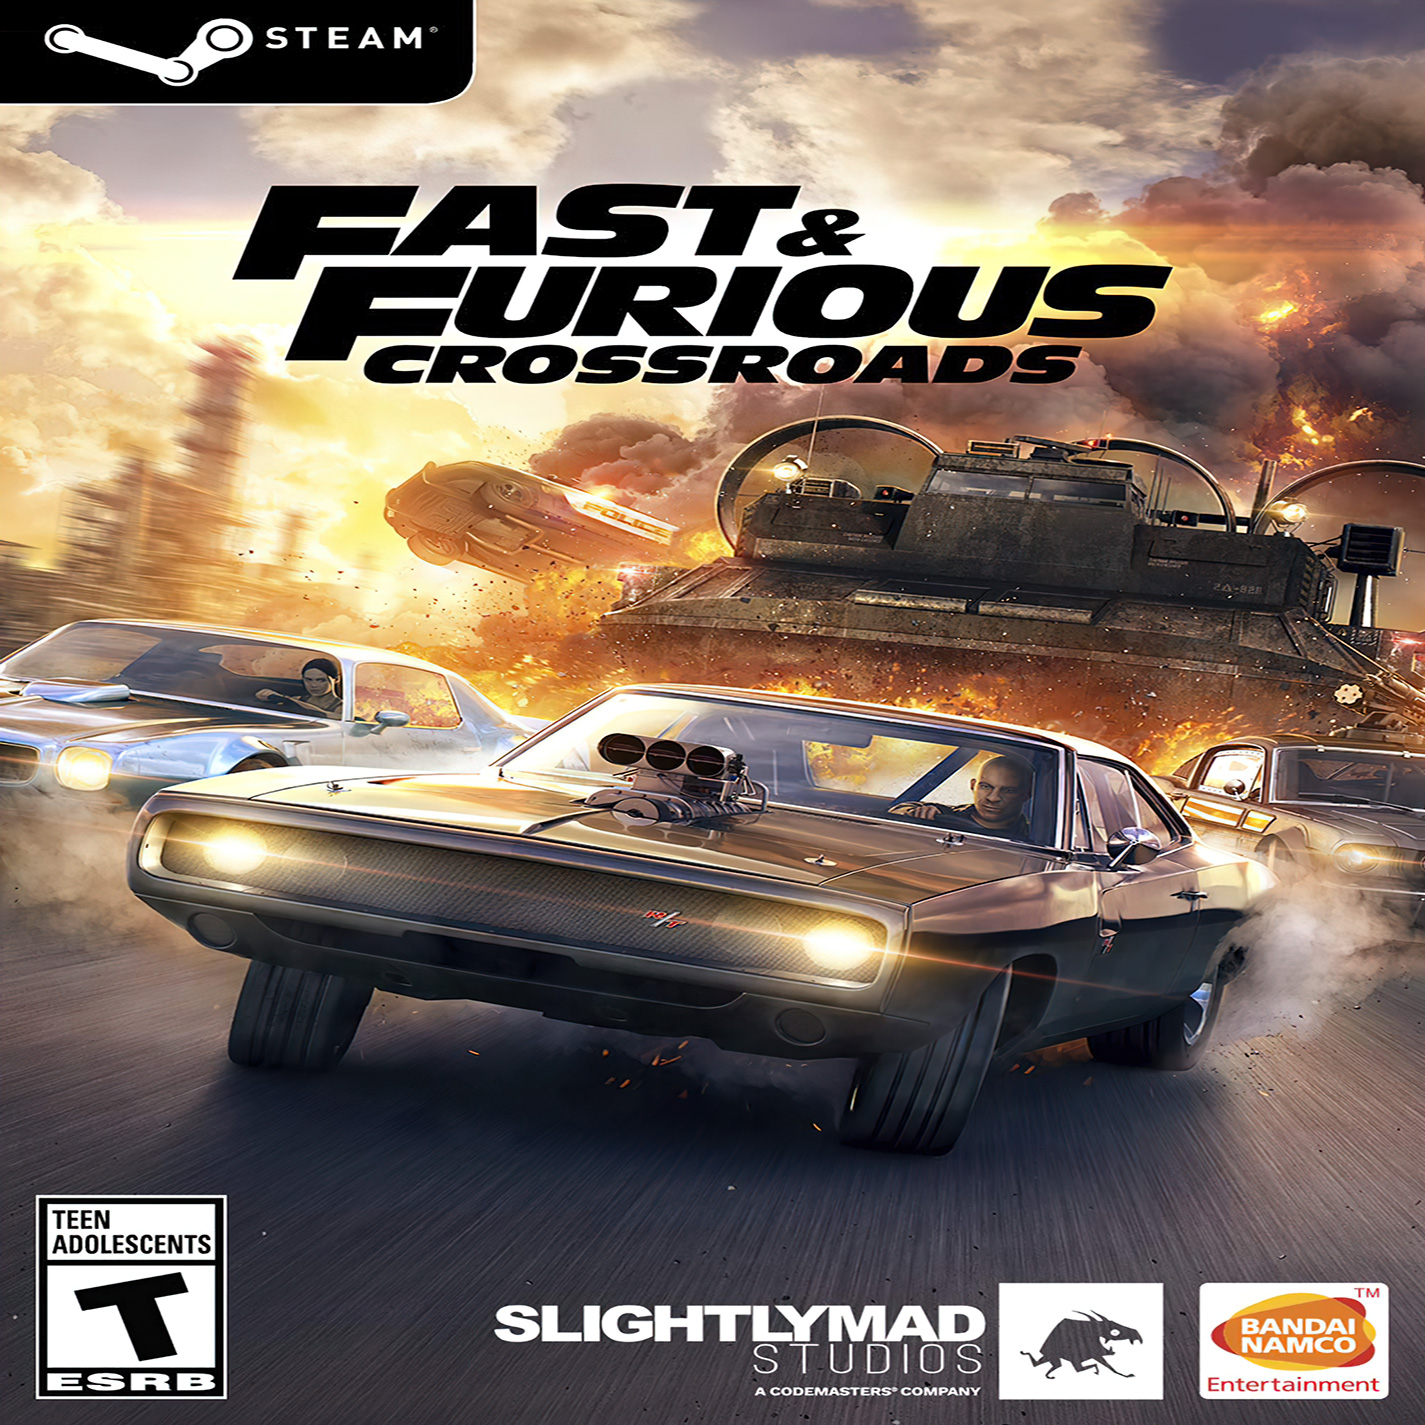 Fast and furious steam crossroads фото 18